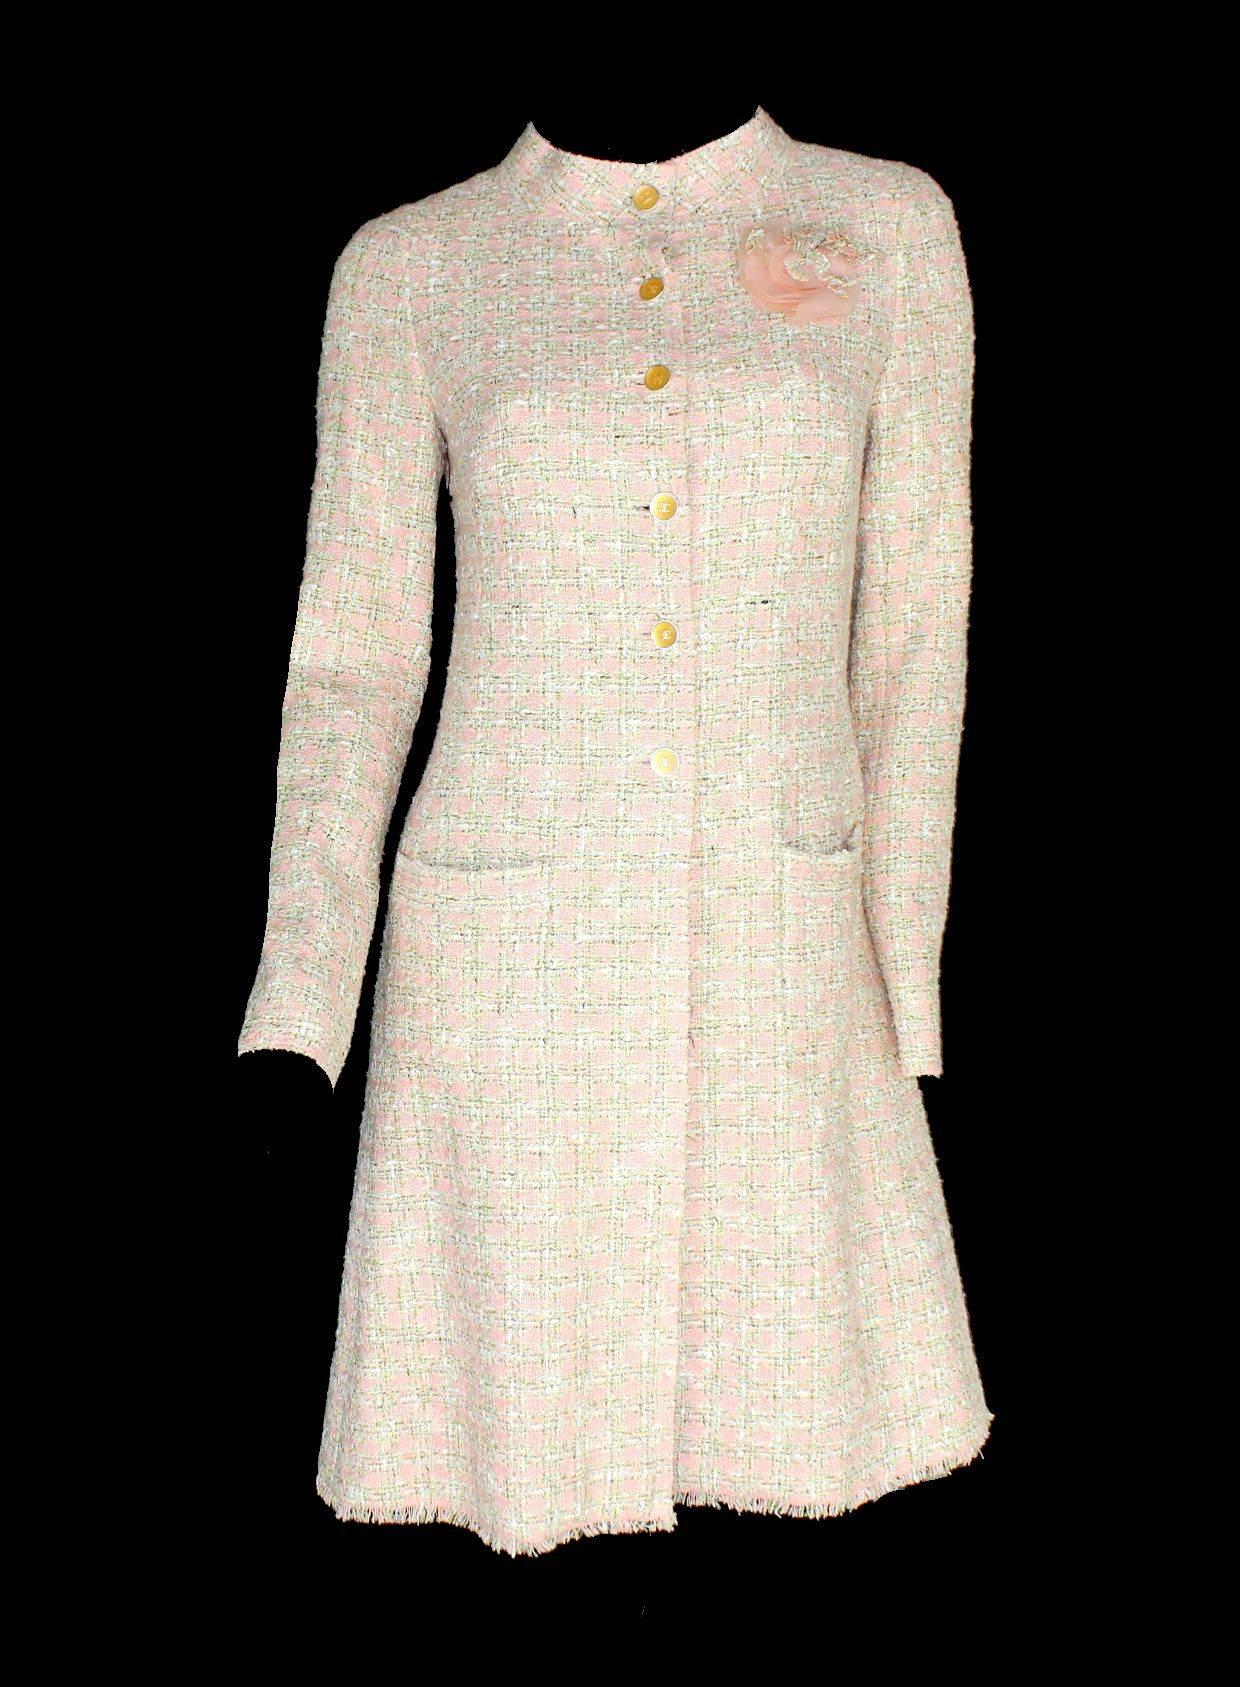 
        Beautiful CHANEL tweed coat 
        A true CHANEL signature item that will last you for many years
        Stunning pastel colors - perfect for spring
        Two front pockets
Beautiful detachable silk & tweed camellia brooch
       